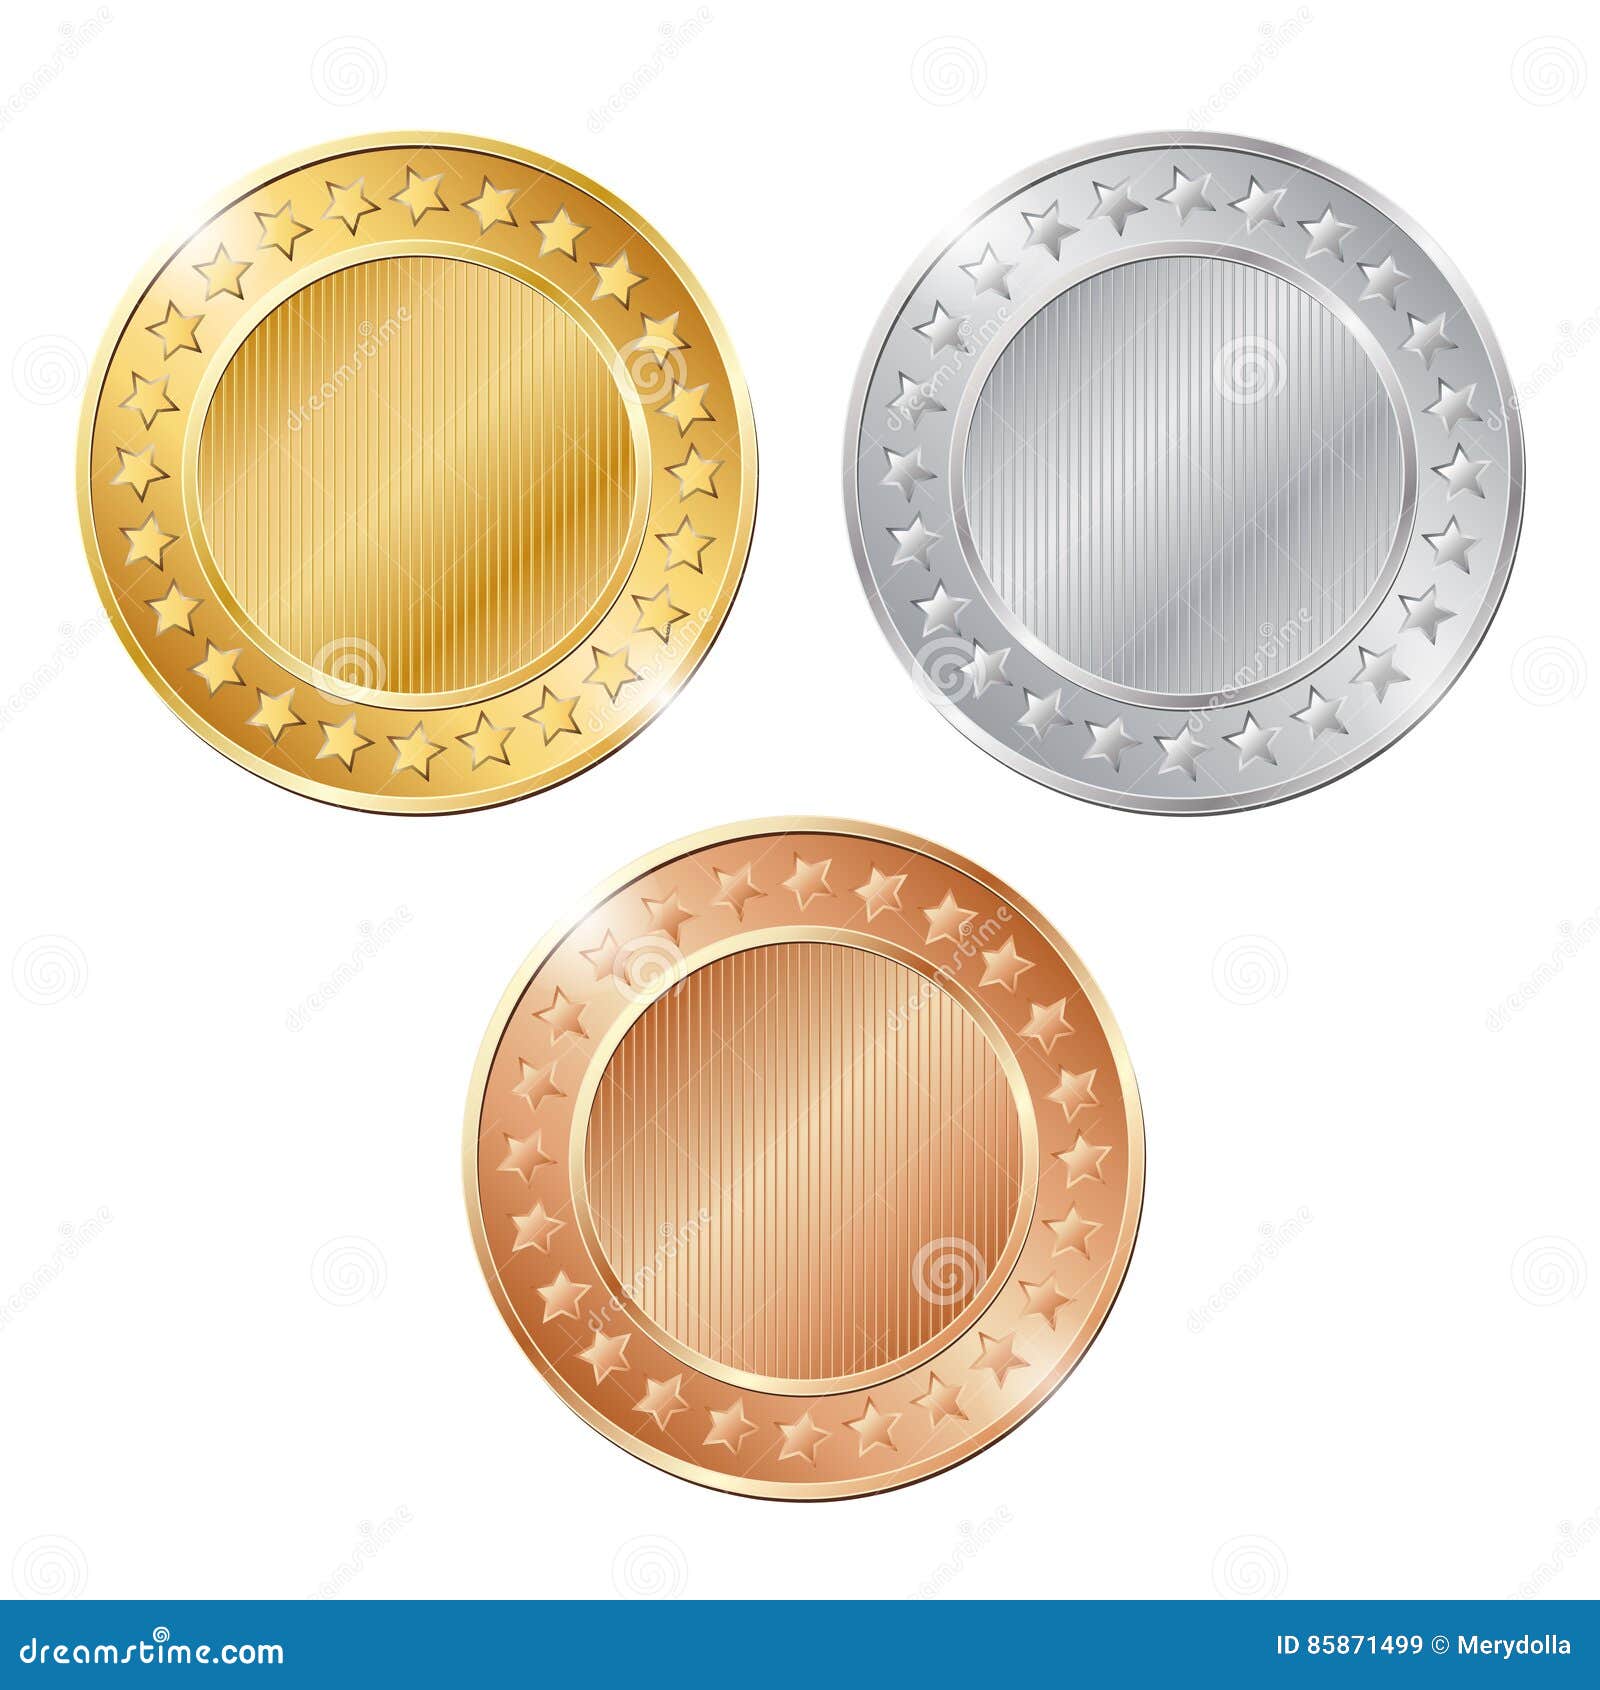 Illustration of Three Blank Coins on White Background Stock ...